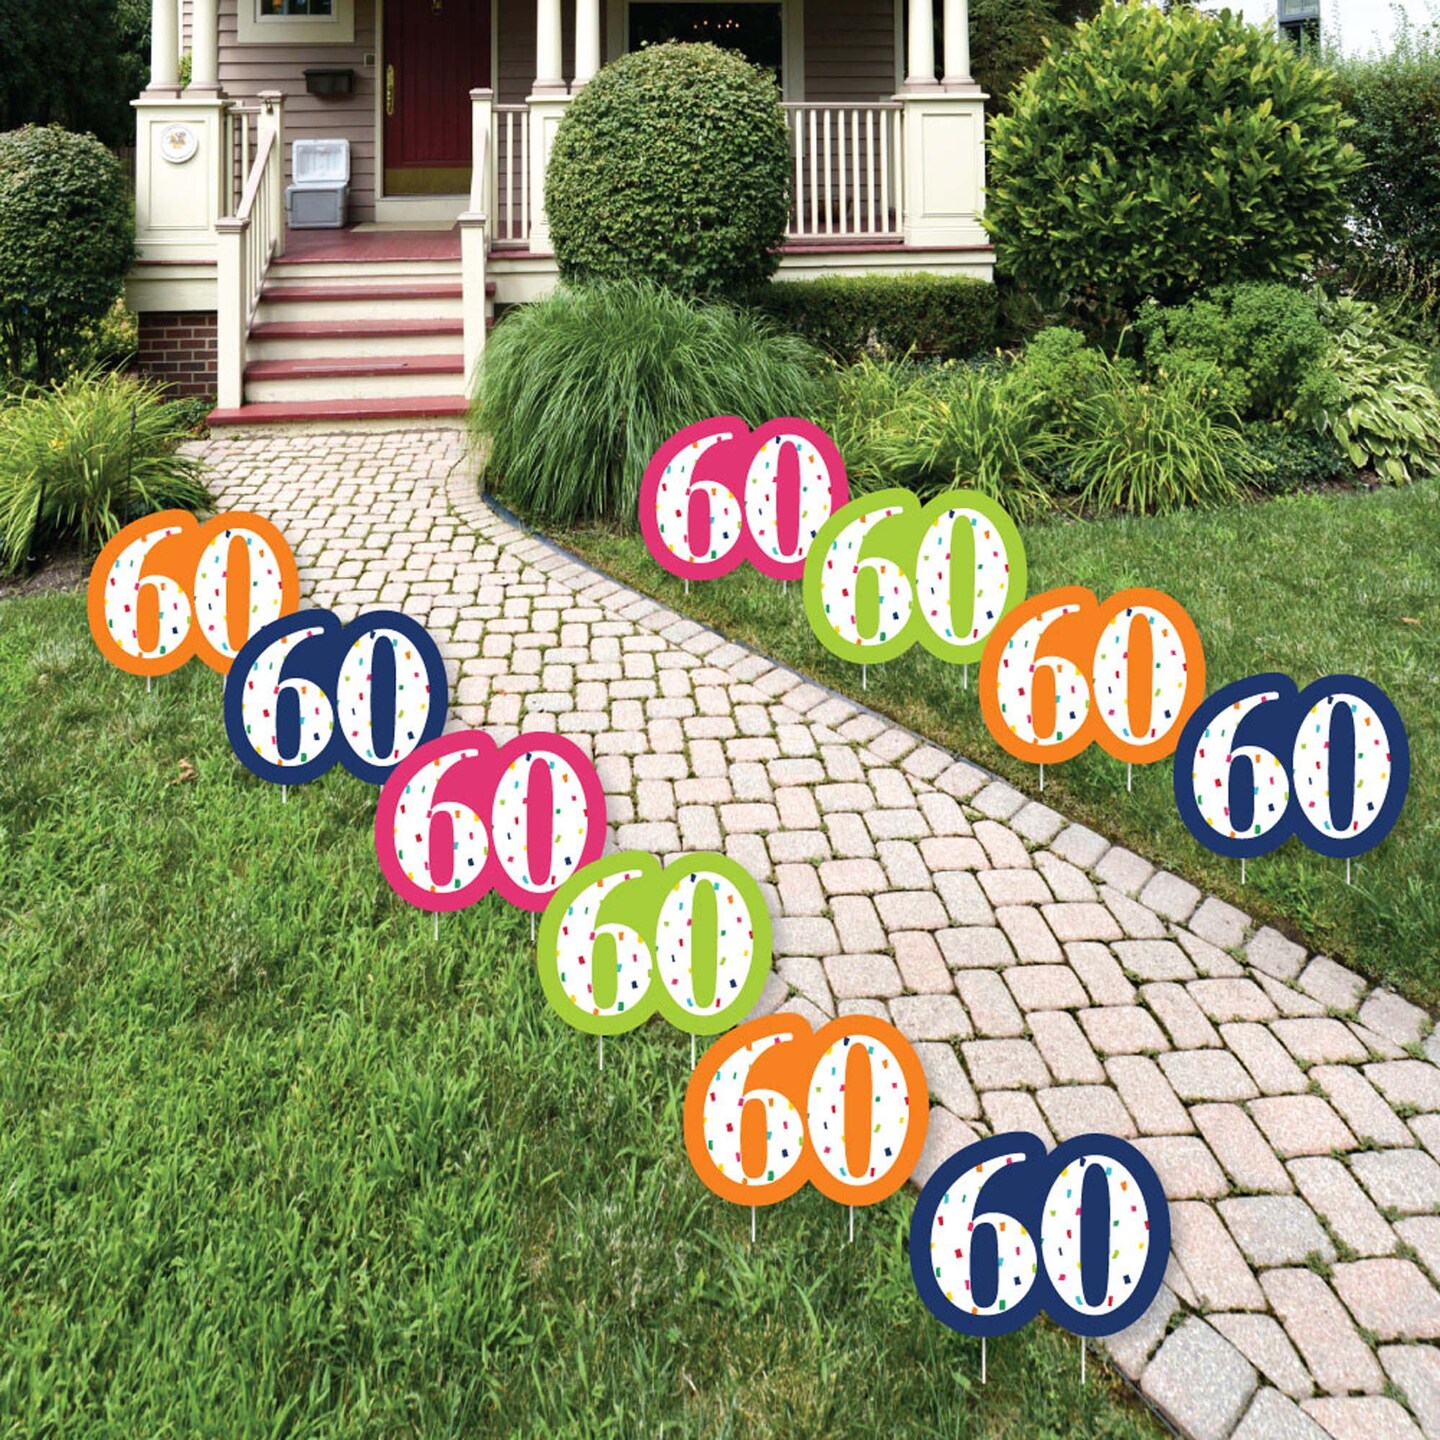 Big Dot of Happiness 60th Birthday - Cheerful Happy Birthday - Lawn Decorations - Outdoor Colorful Sixtieth Birthday Party Yard Decorations - 10 Piece